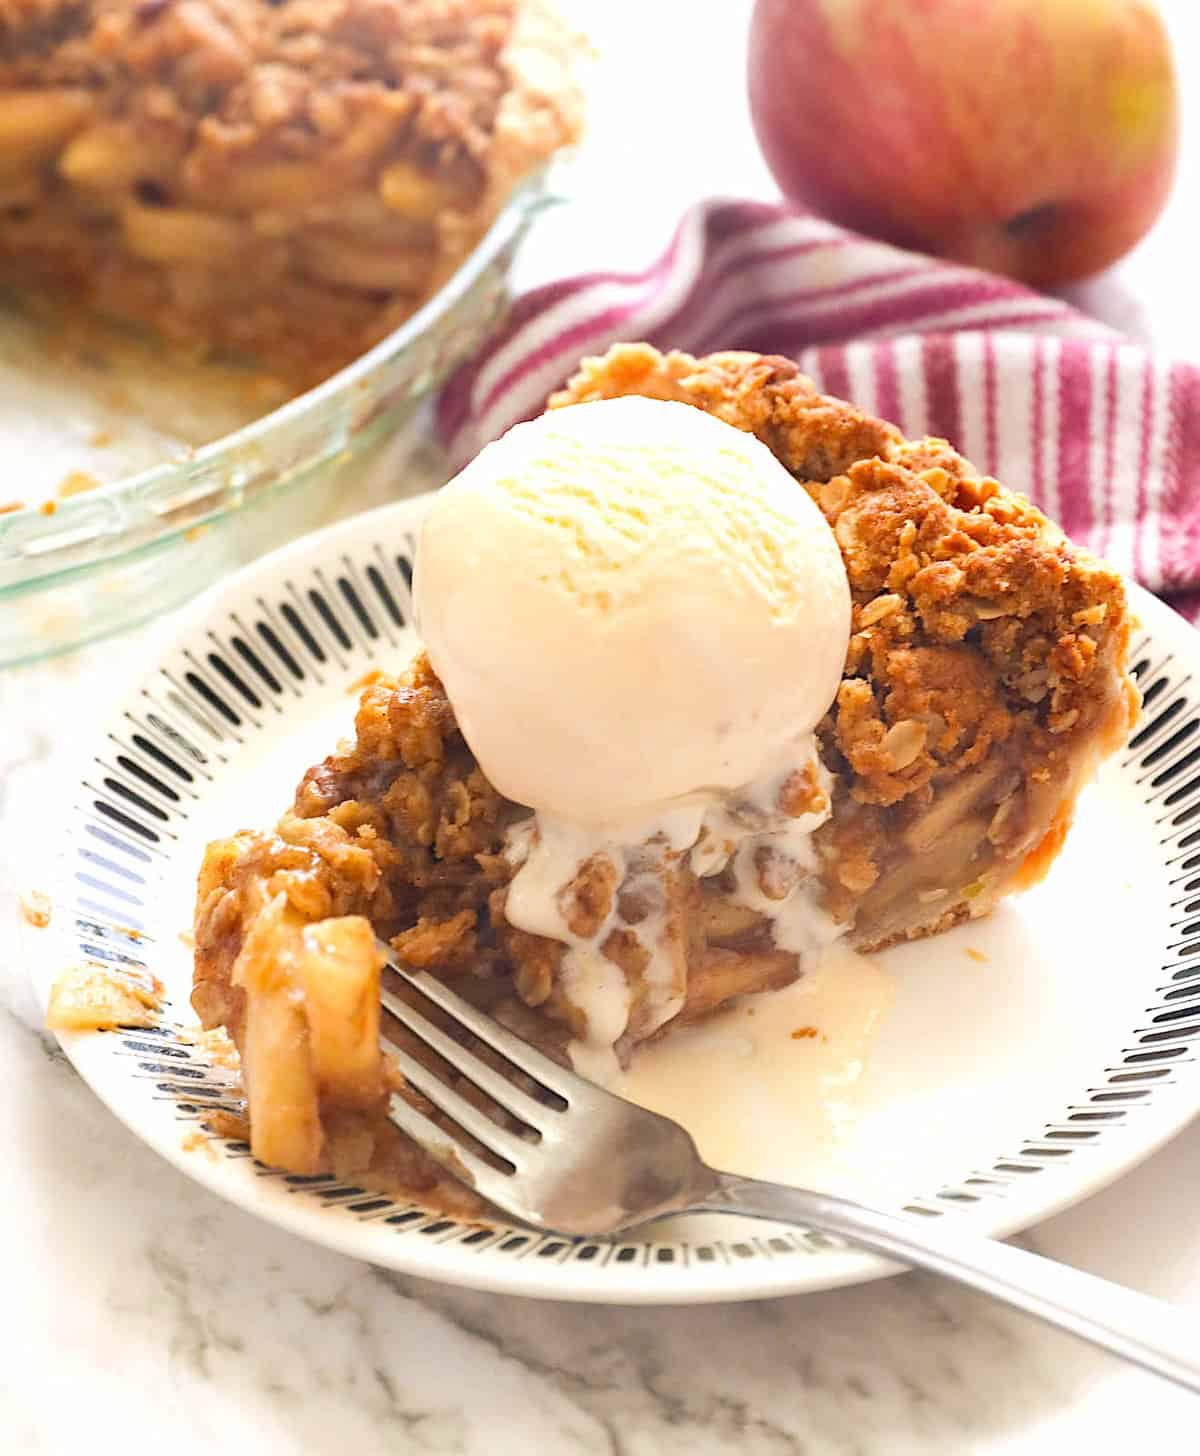 A slice of sweet dutch apple pie served with refreshing ice cream